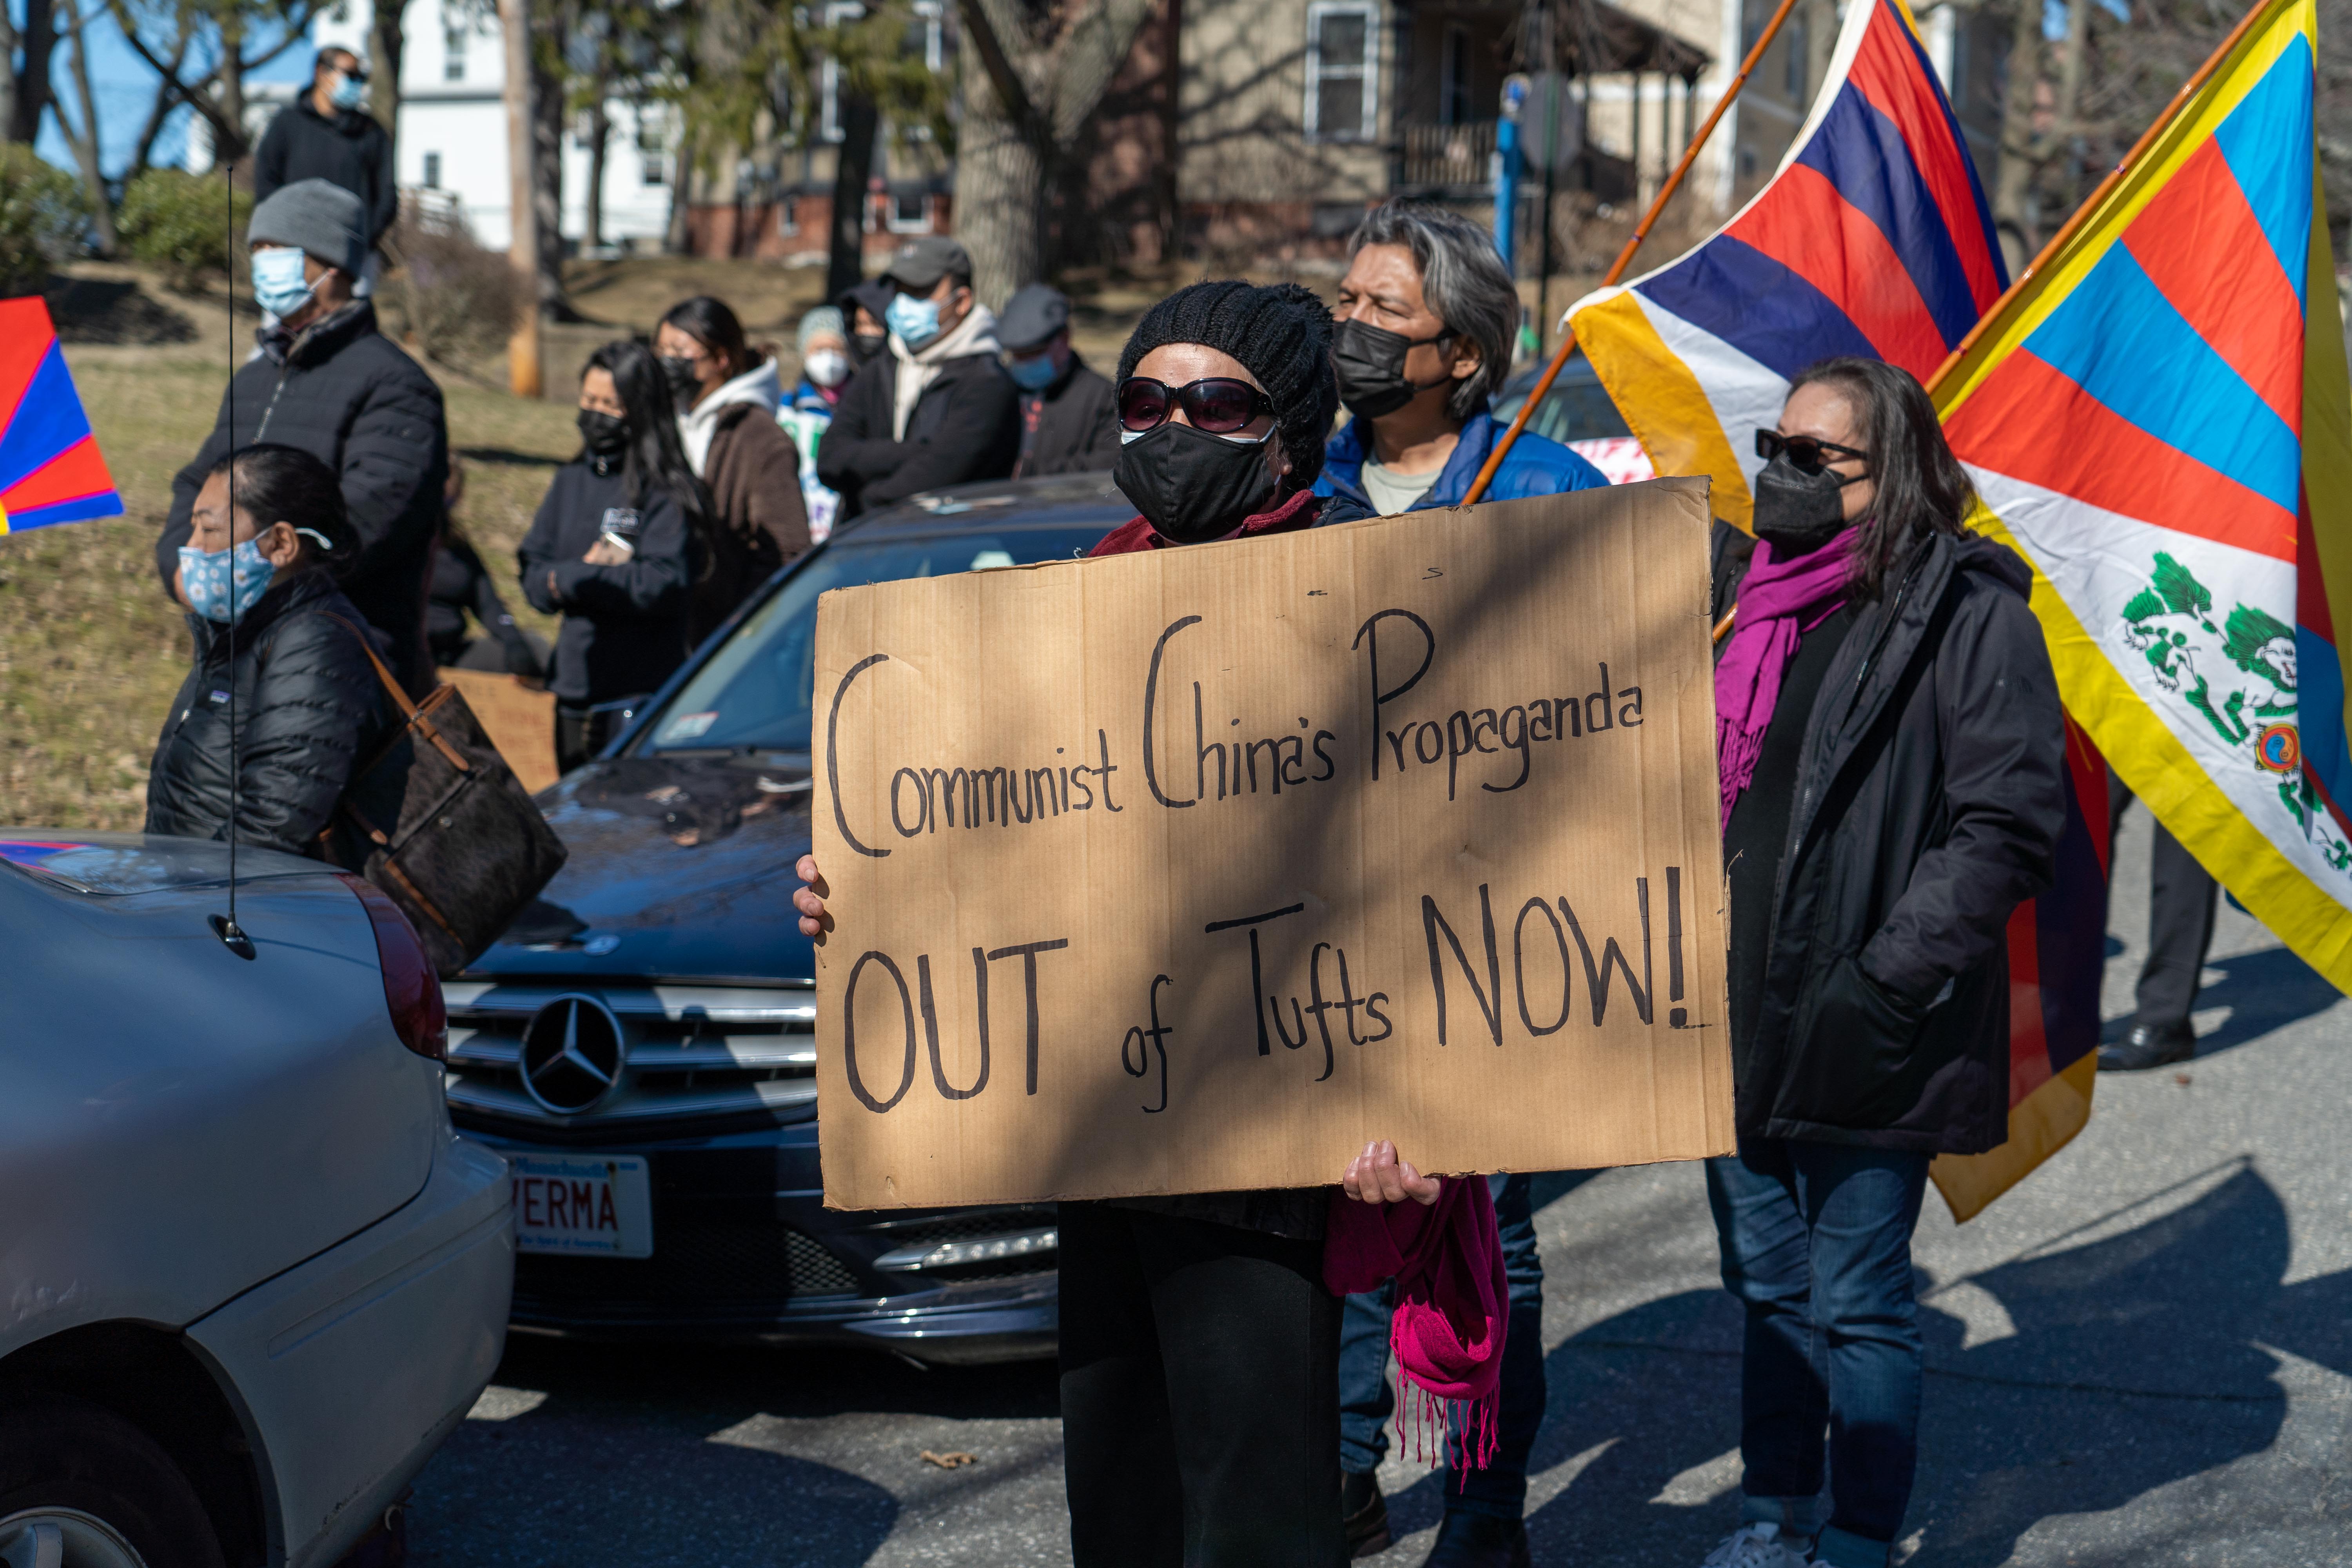 Confucius Institute at Tufts University Is Set to Close Amid Protests